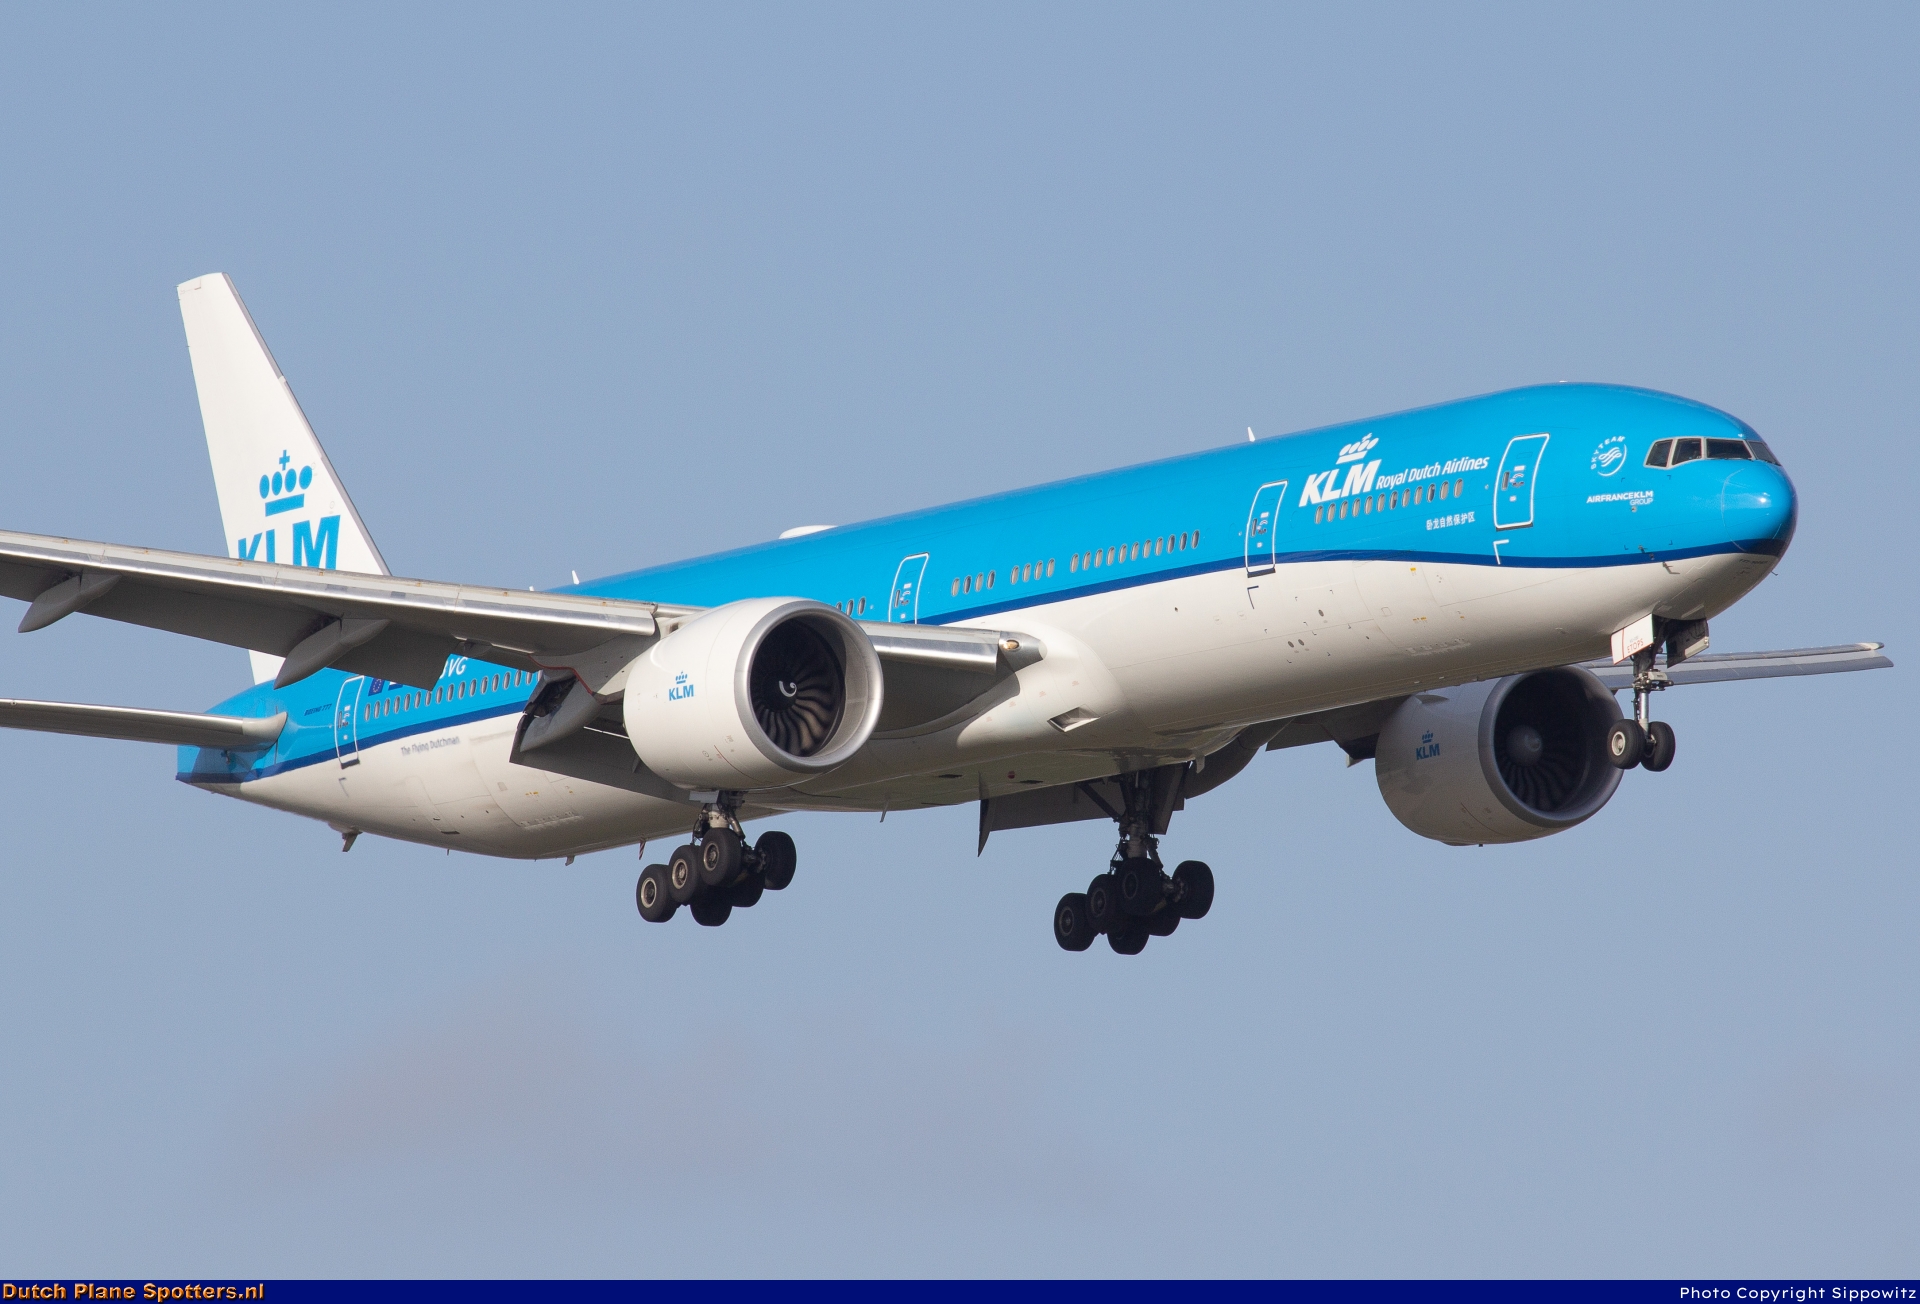 PH-BVG Boeing 777-300 KLM Royal Dutch Airlines by Sippowitz